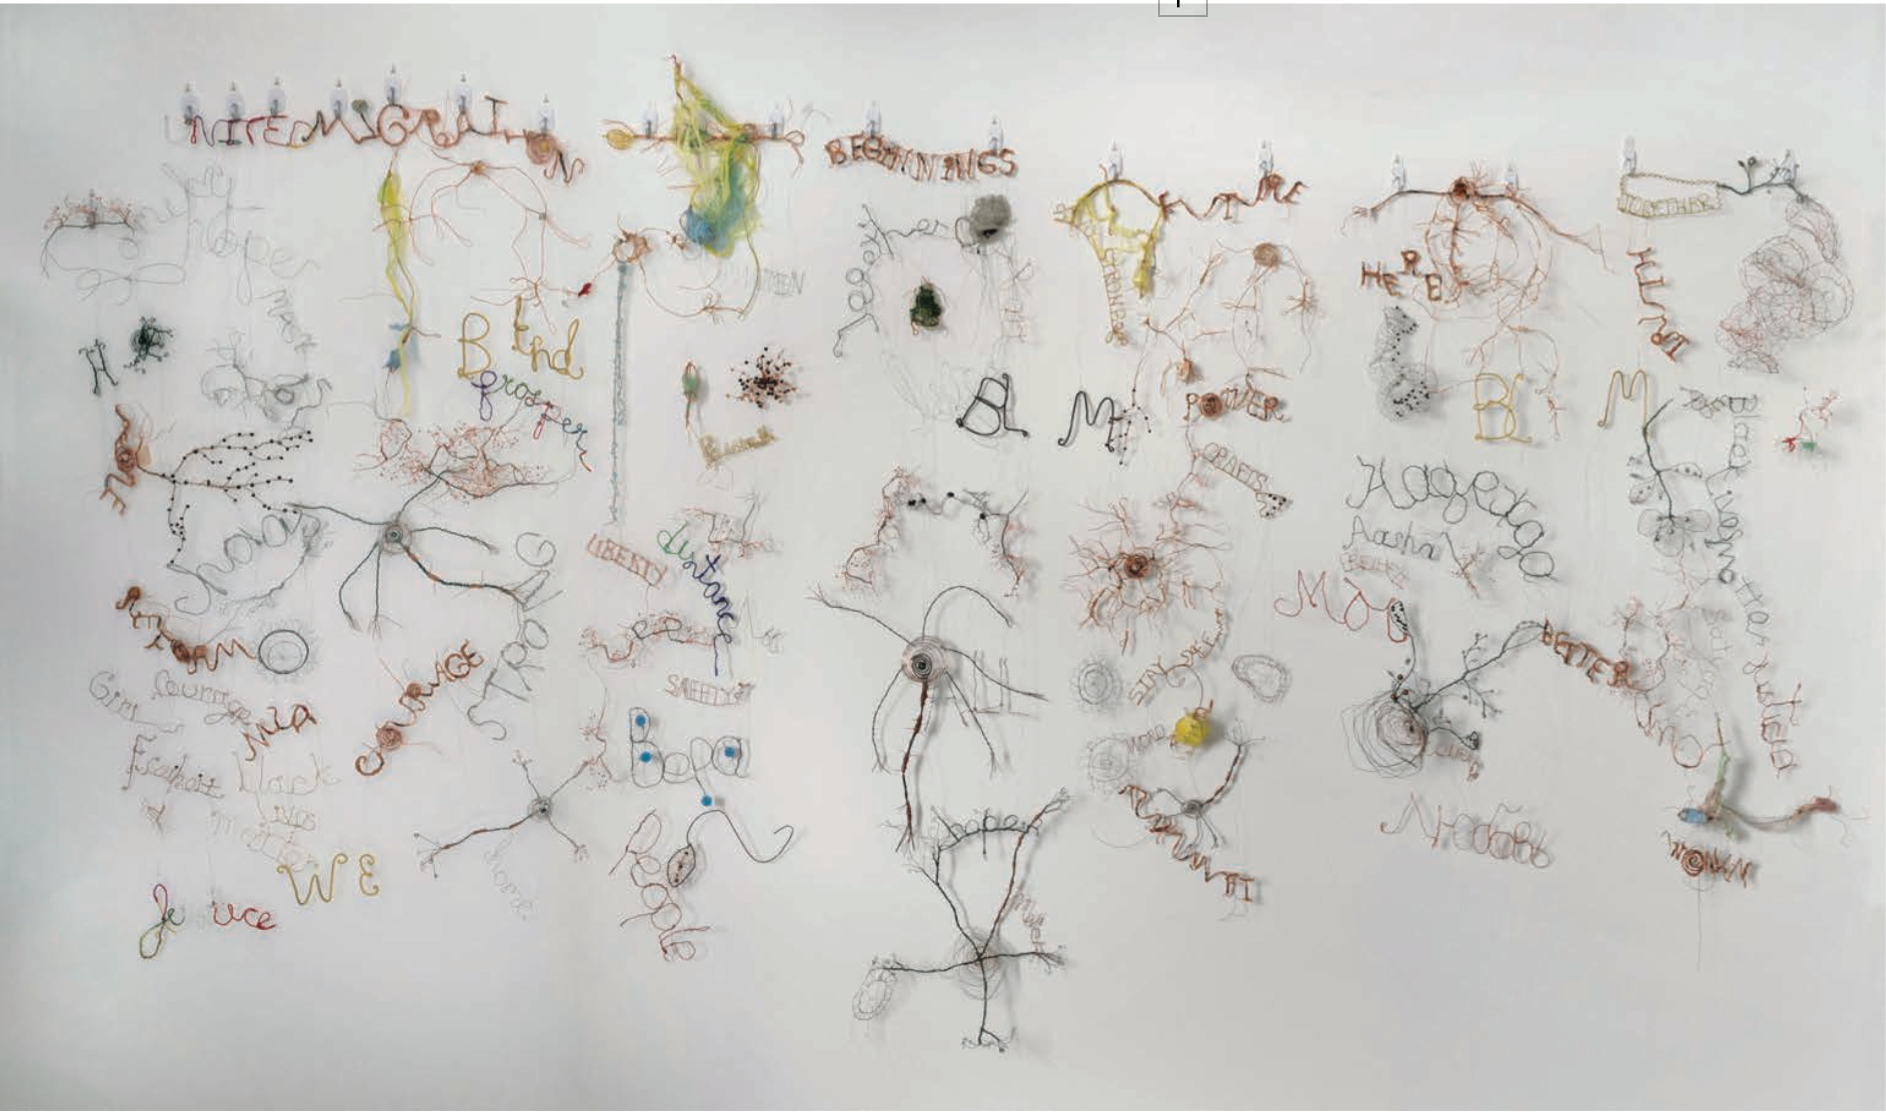 Image Description: A white wall with approximately 50 hand-twisted wire pieces hanging next to one another in a scattered manner. The pieces are made of various metals like copper, silver, and gold, and notable pieces read words like "BLM," "Courage," and "Strong." Some wire pieces are bent into more abstract shapes and forms.